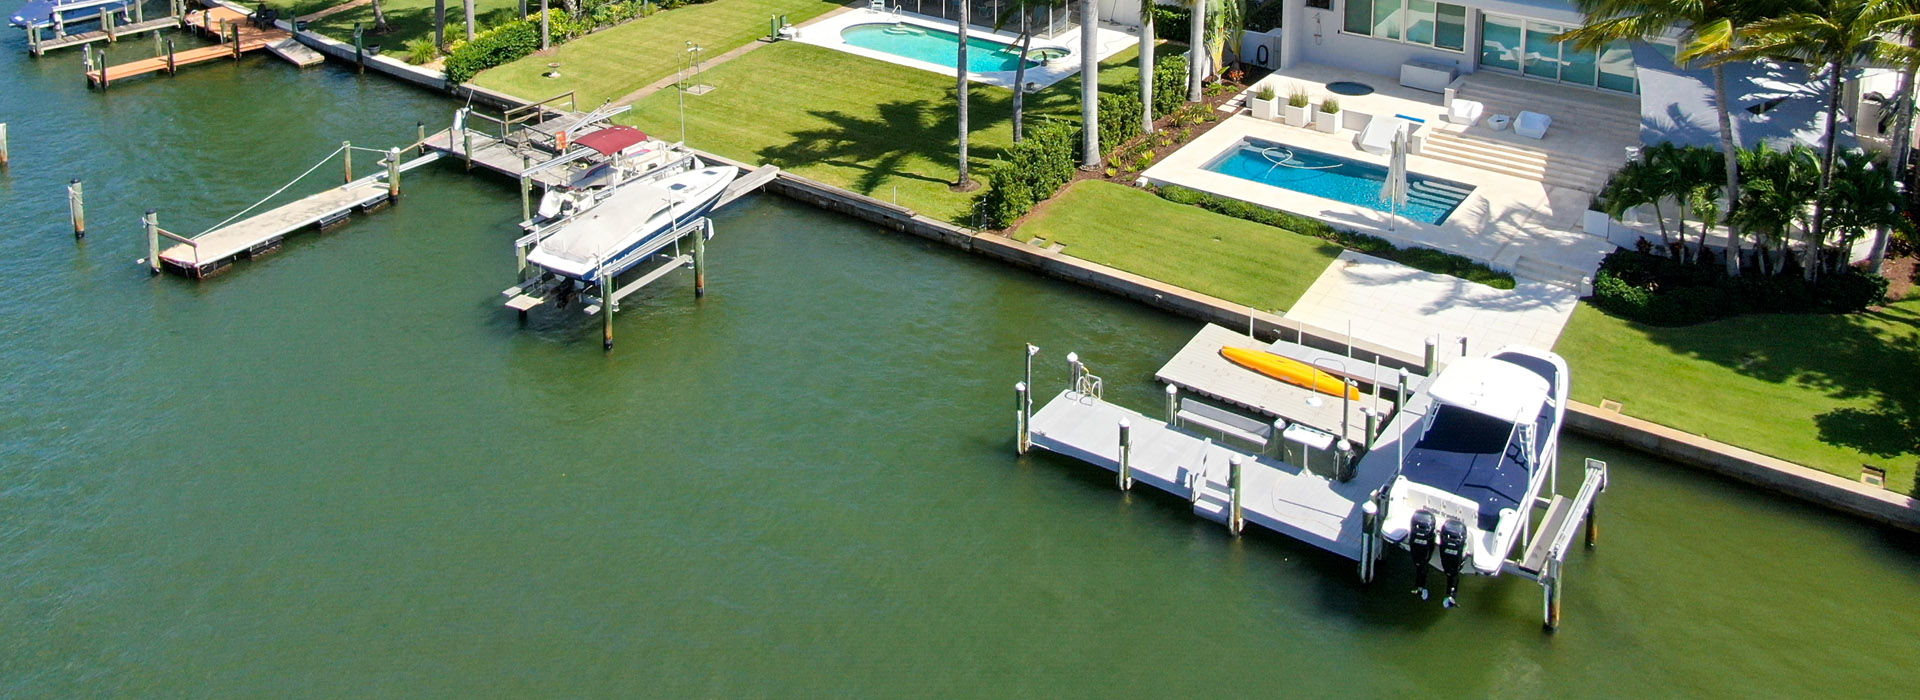 Docks and Boat Lifts